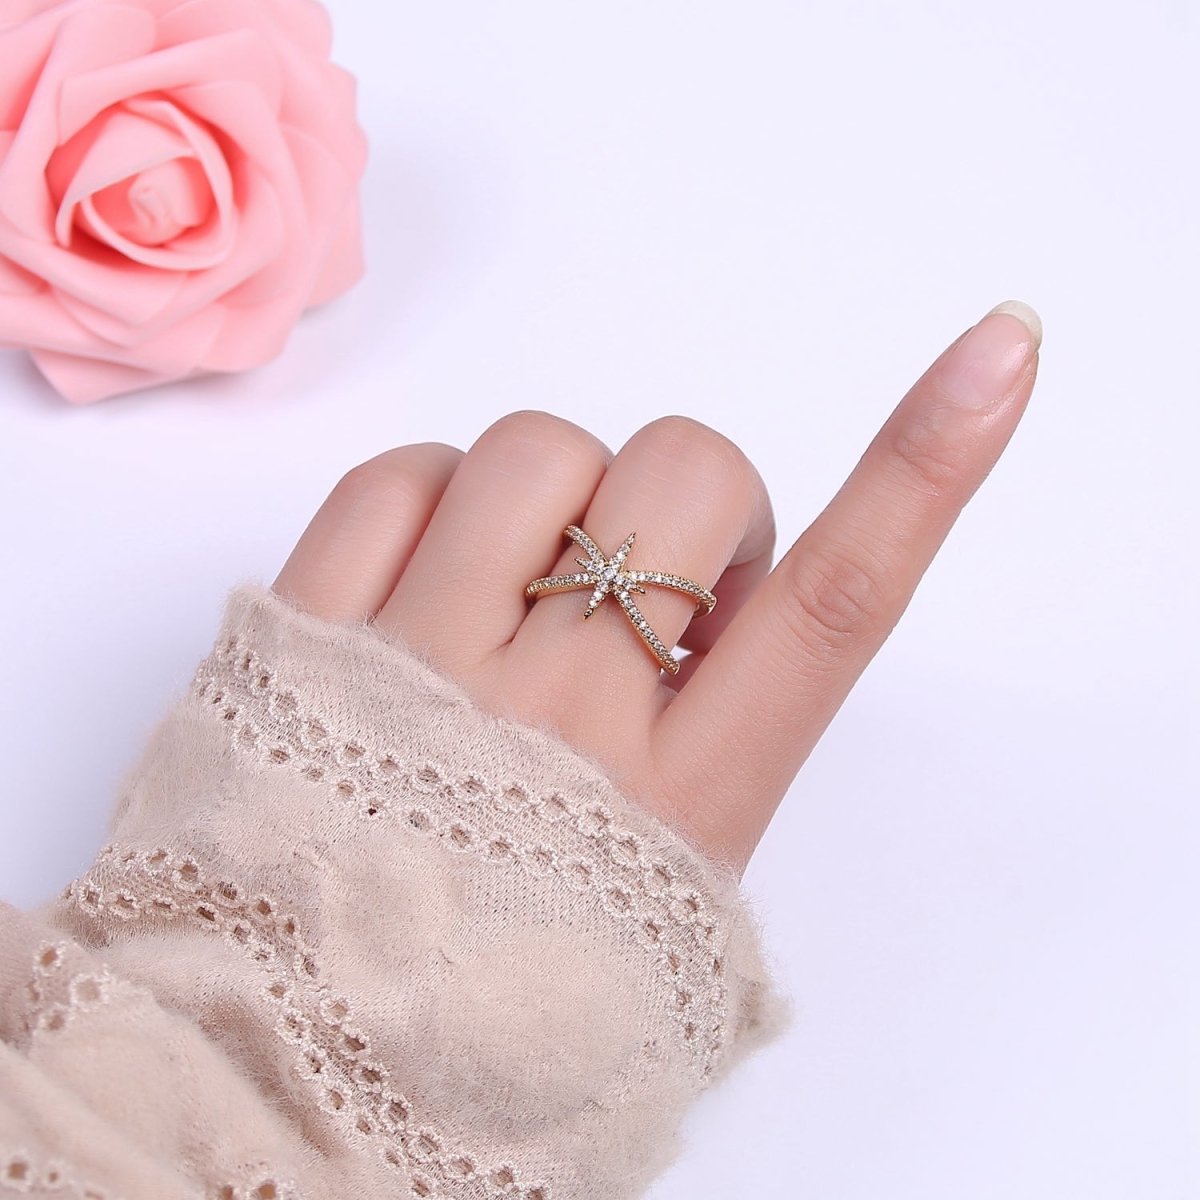 Criss Cross Star Ring, CZ Ring, Statement Ring Silver, X rings, Crossover Ring Open Adjustable 14k Gold Filled S-449 S-450 - DLUXCA